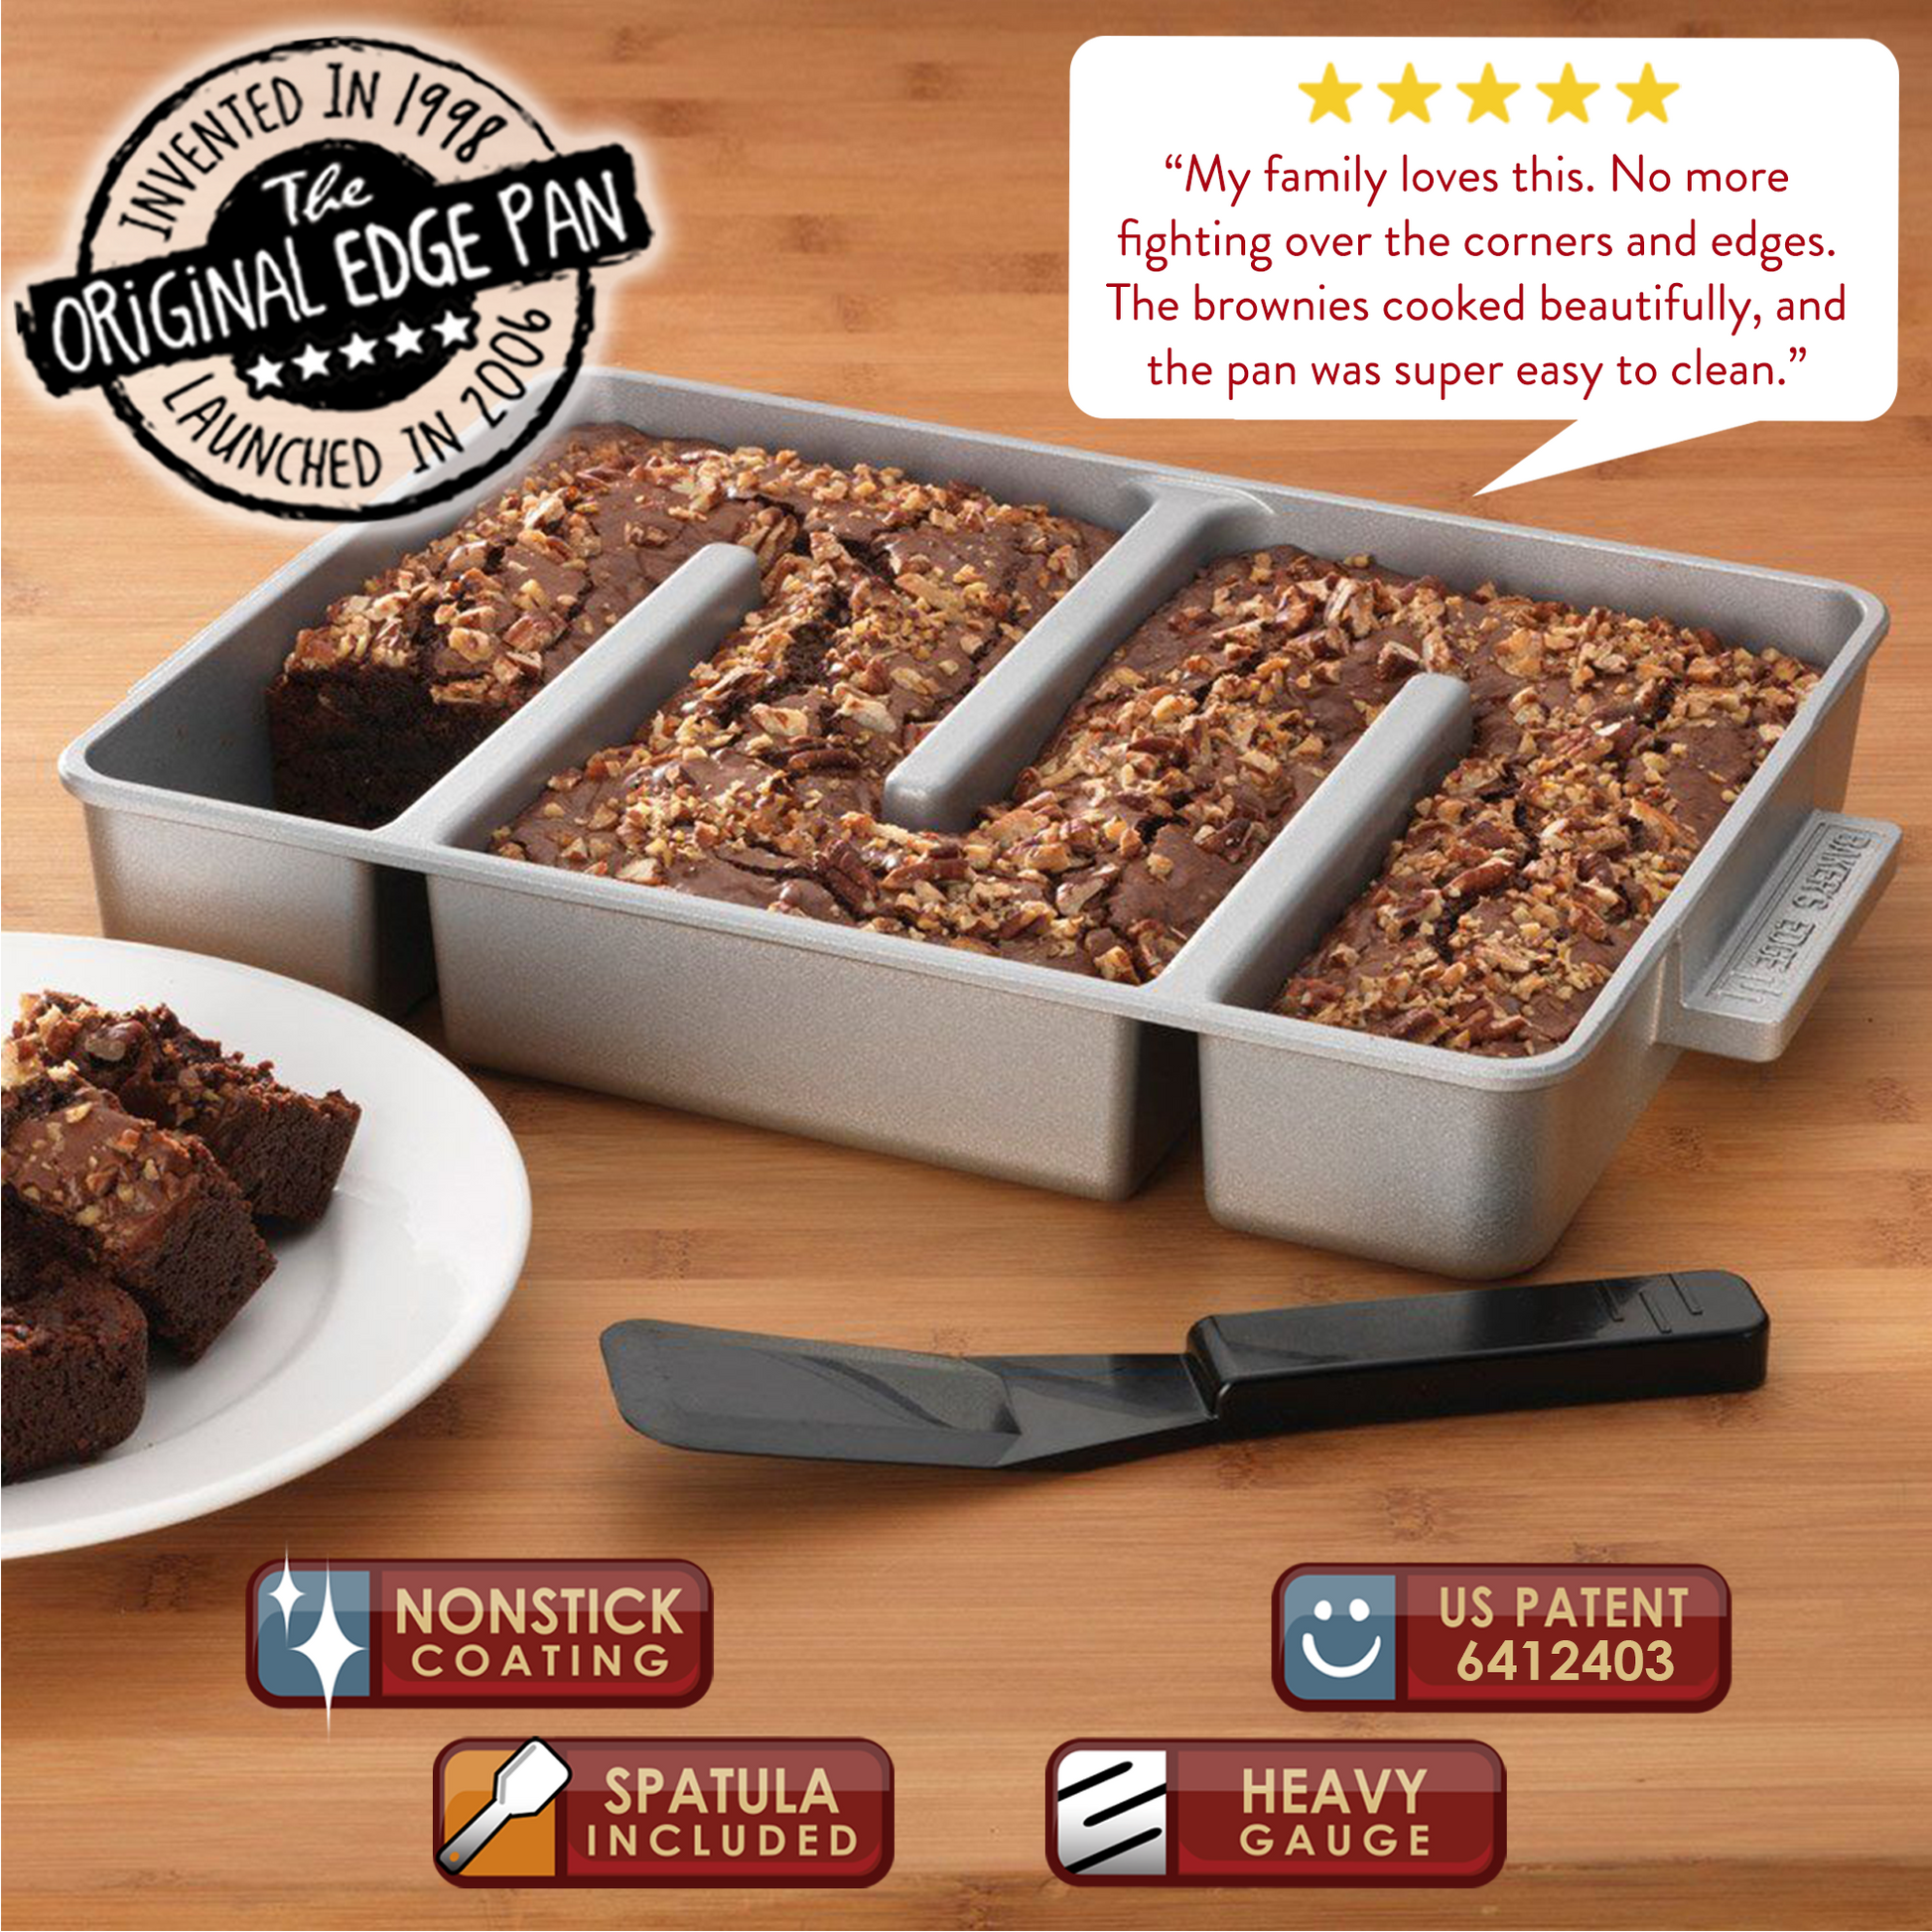 Performance Pans Aluminum Square Cake and Brownie Pan, 8-Inch